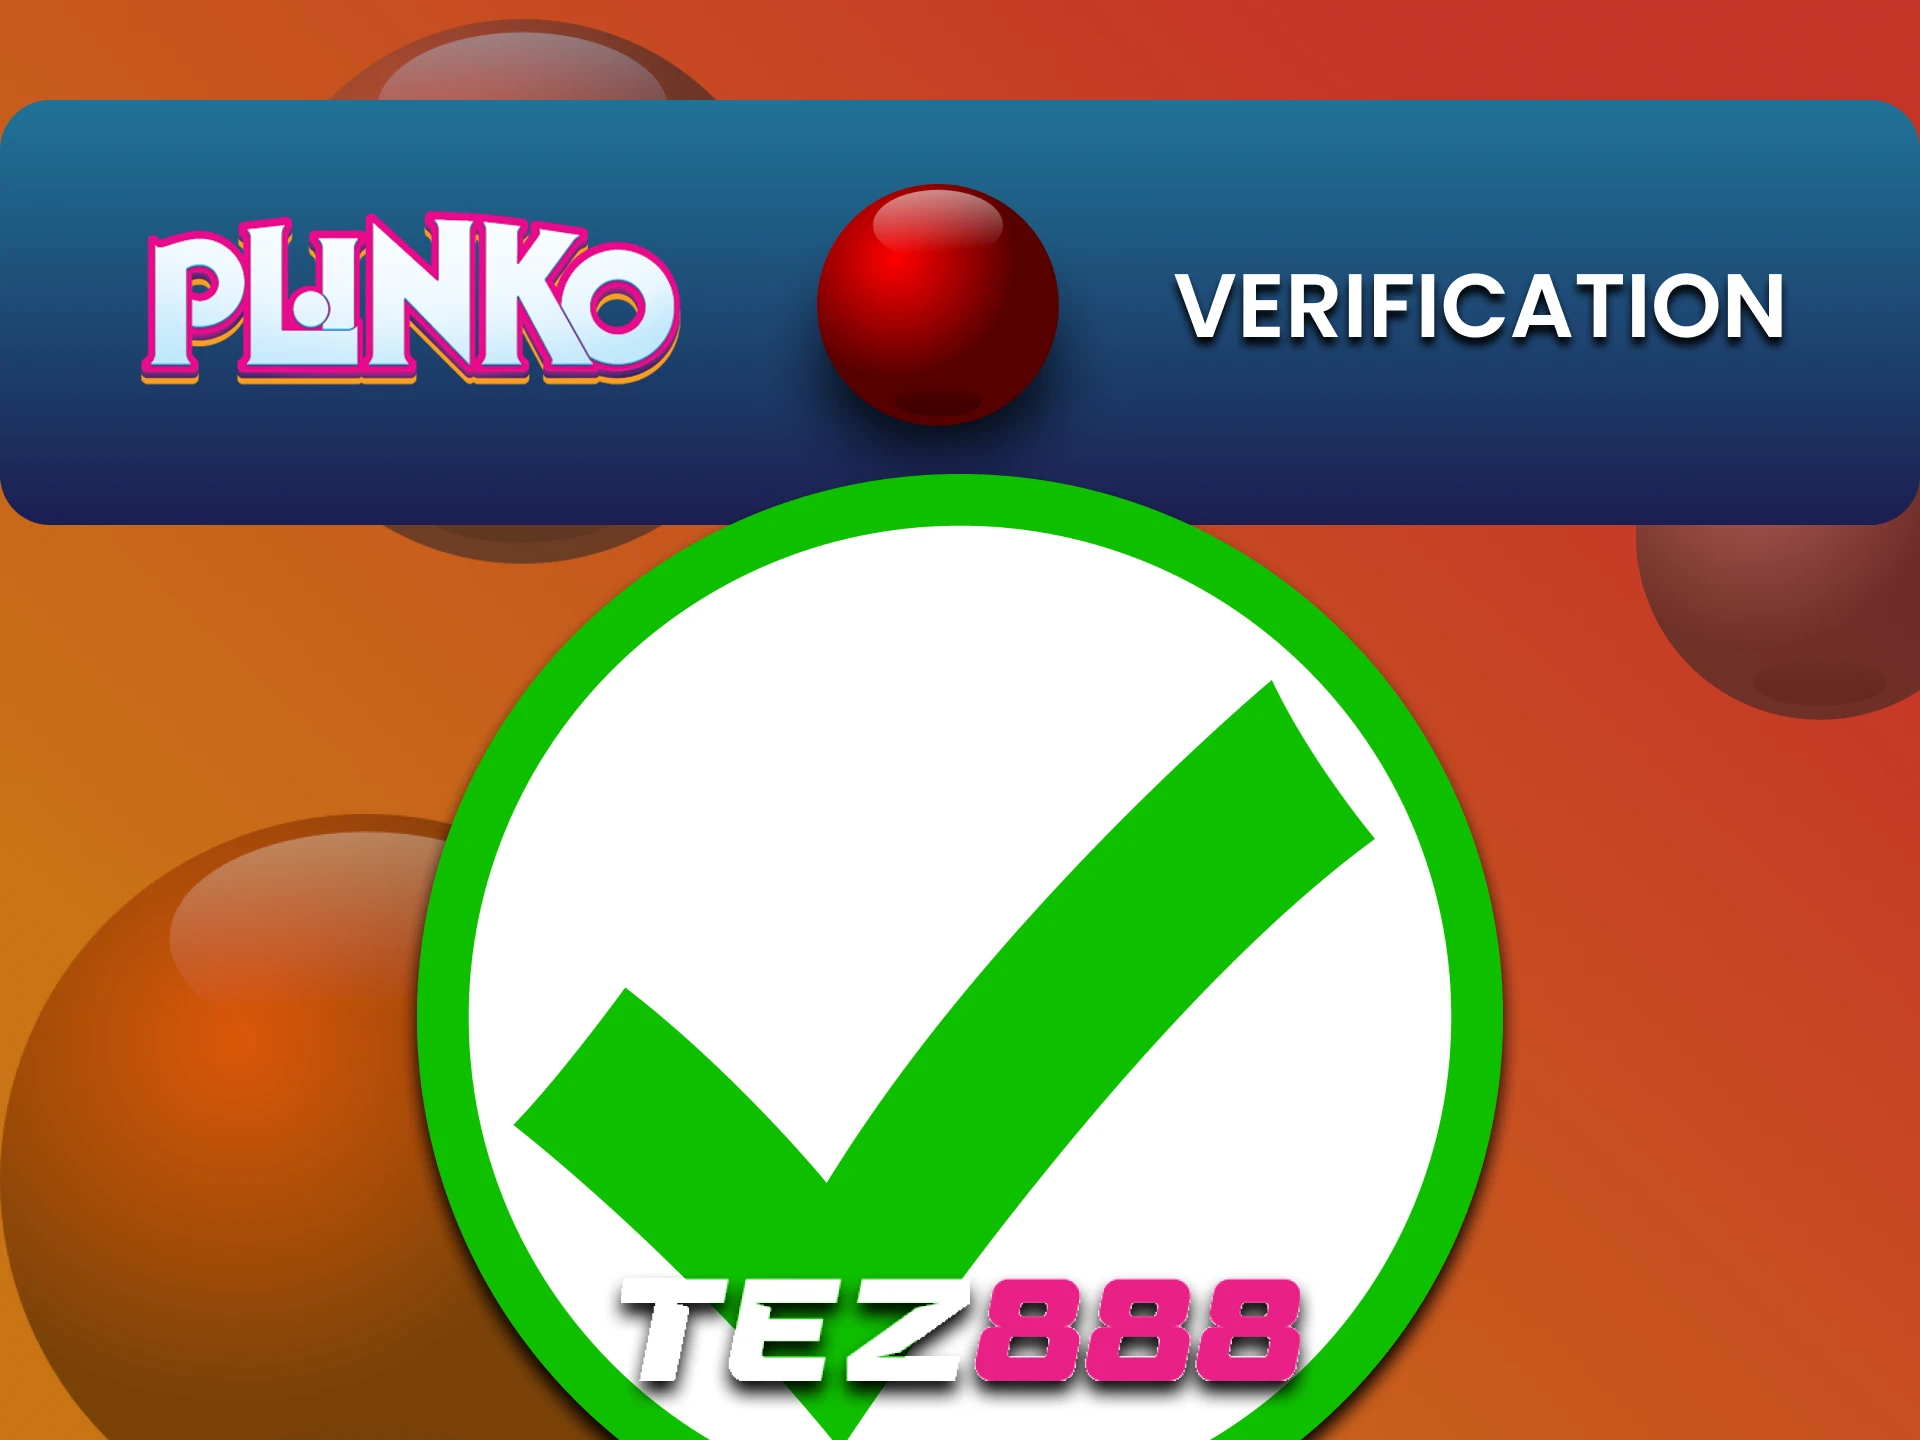 Fill out the details in your Tez888 account to play Plinko.